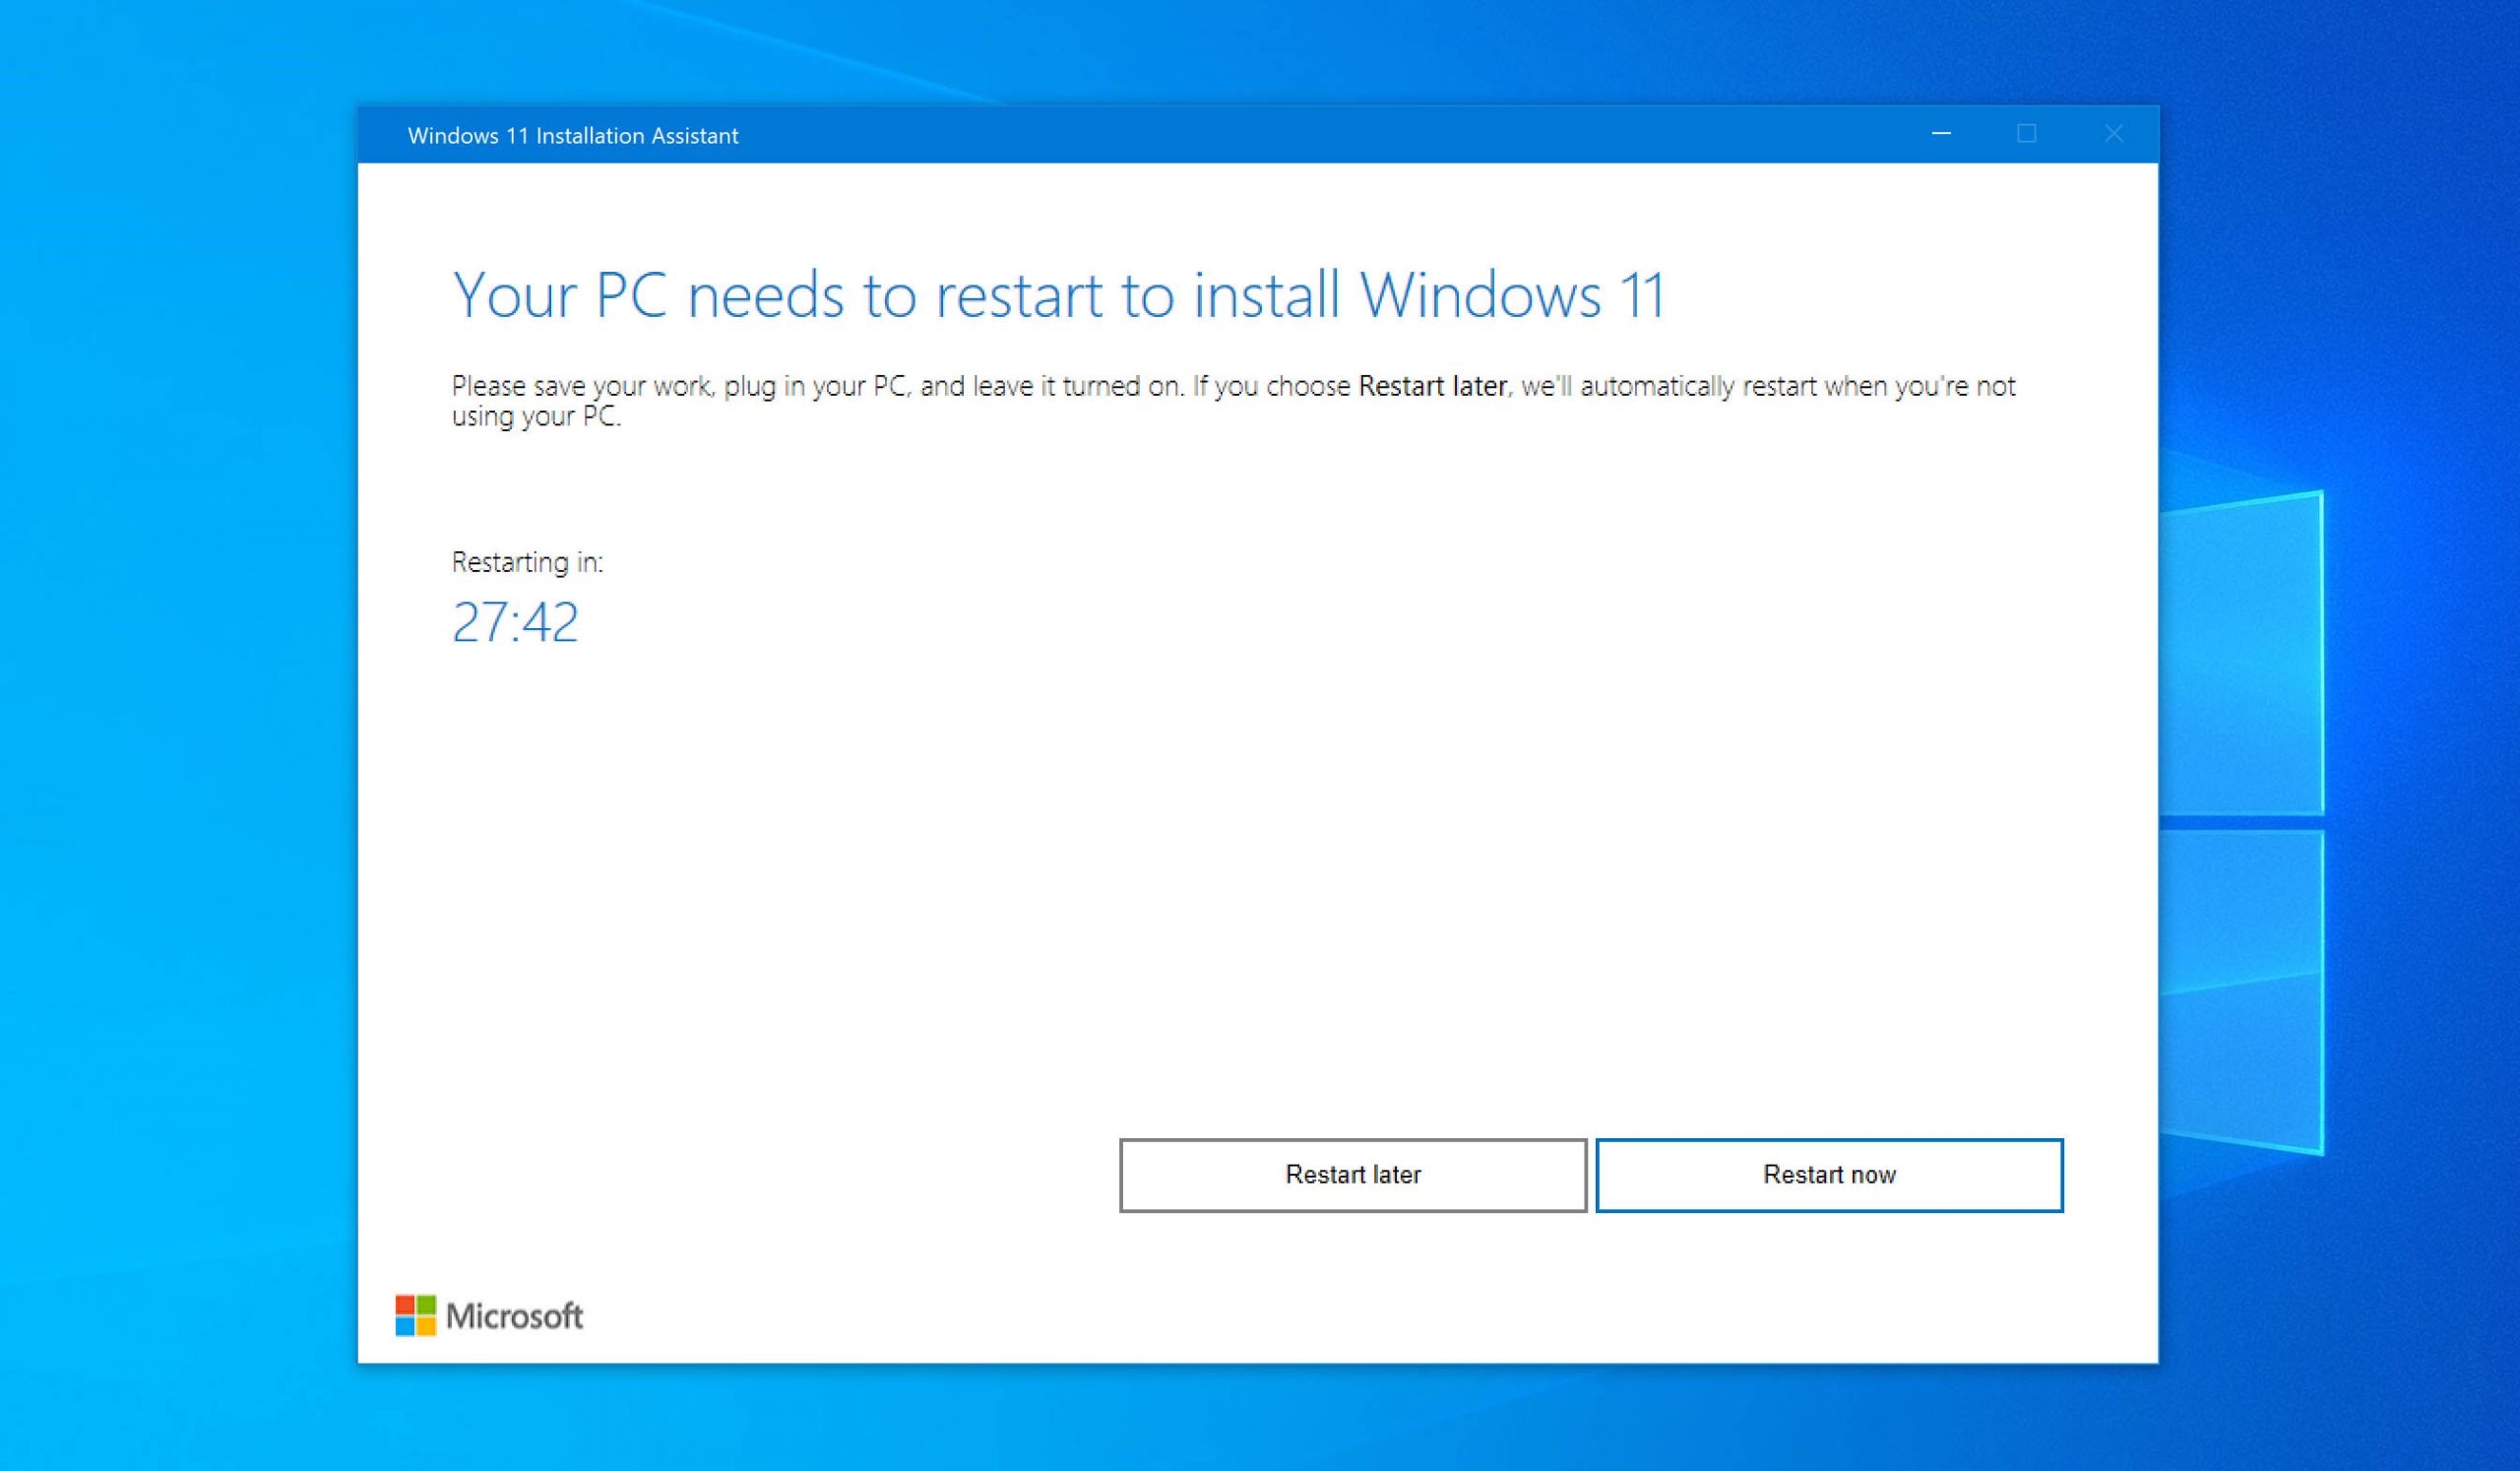 Will I lose anything if I install Windows 11?